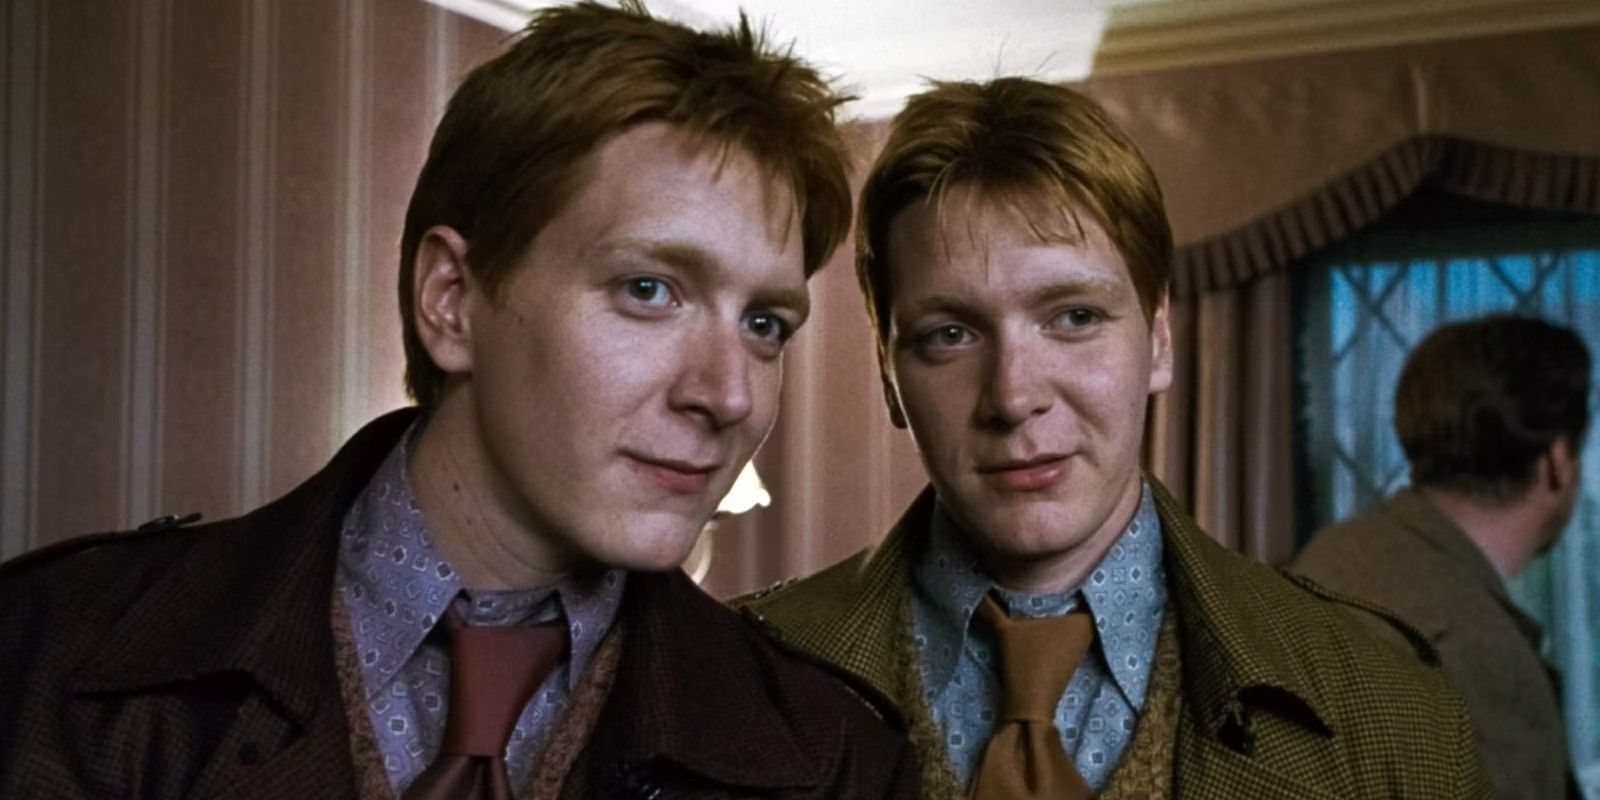 Fred and George Weasley looking at someone in Harry Potter and the Deathly Hallows Part 1.